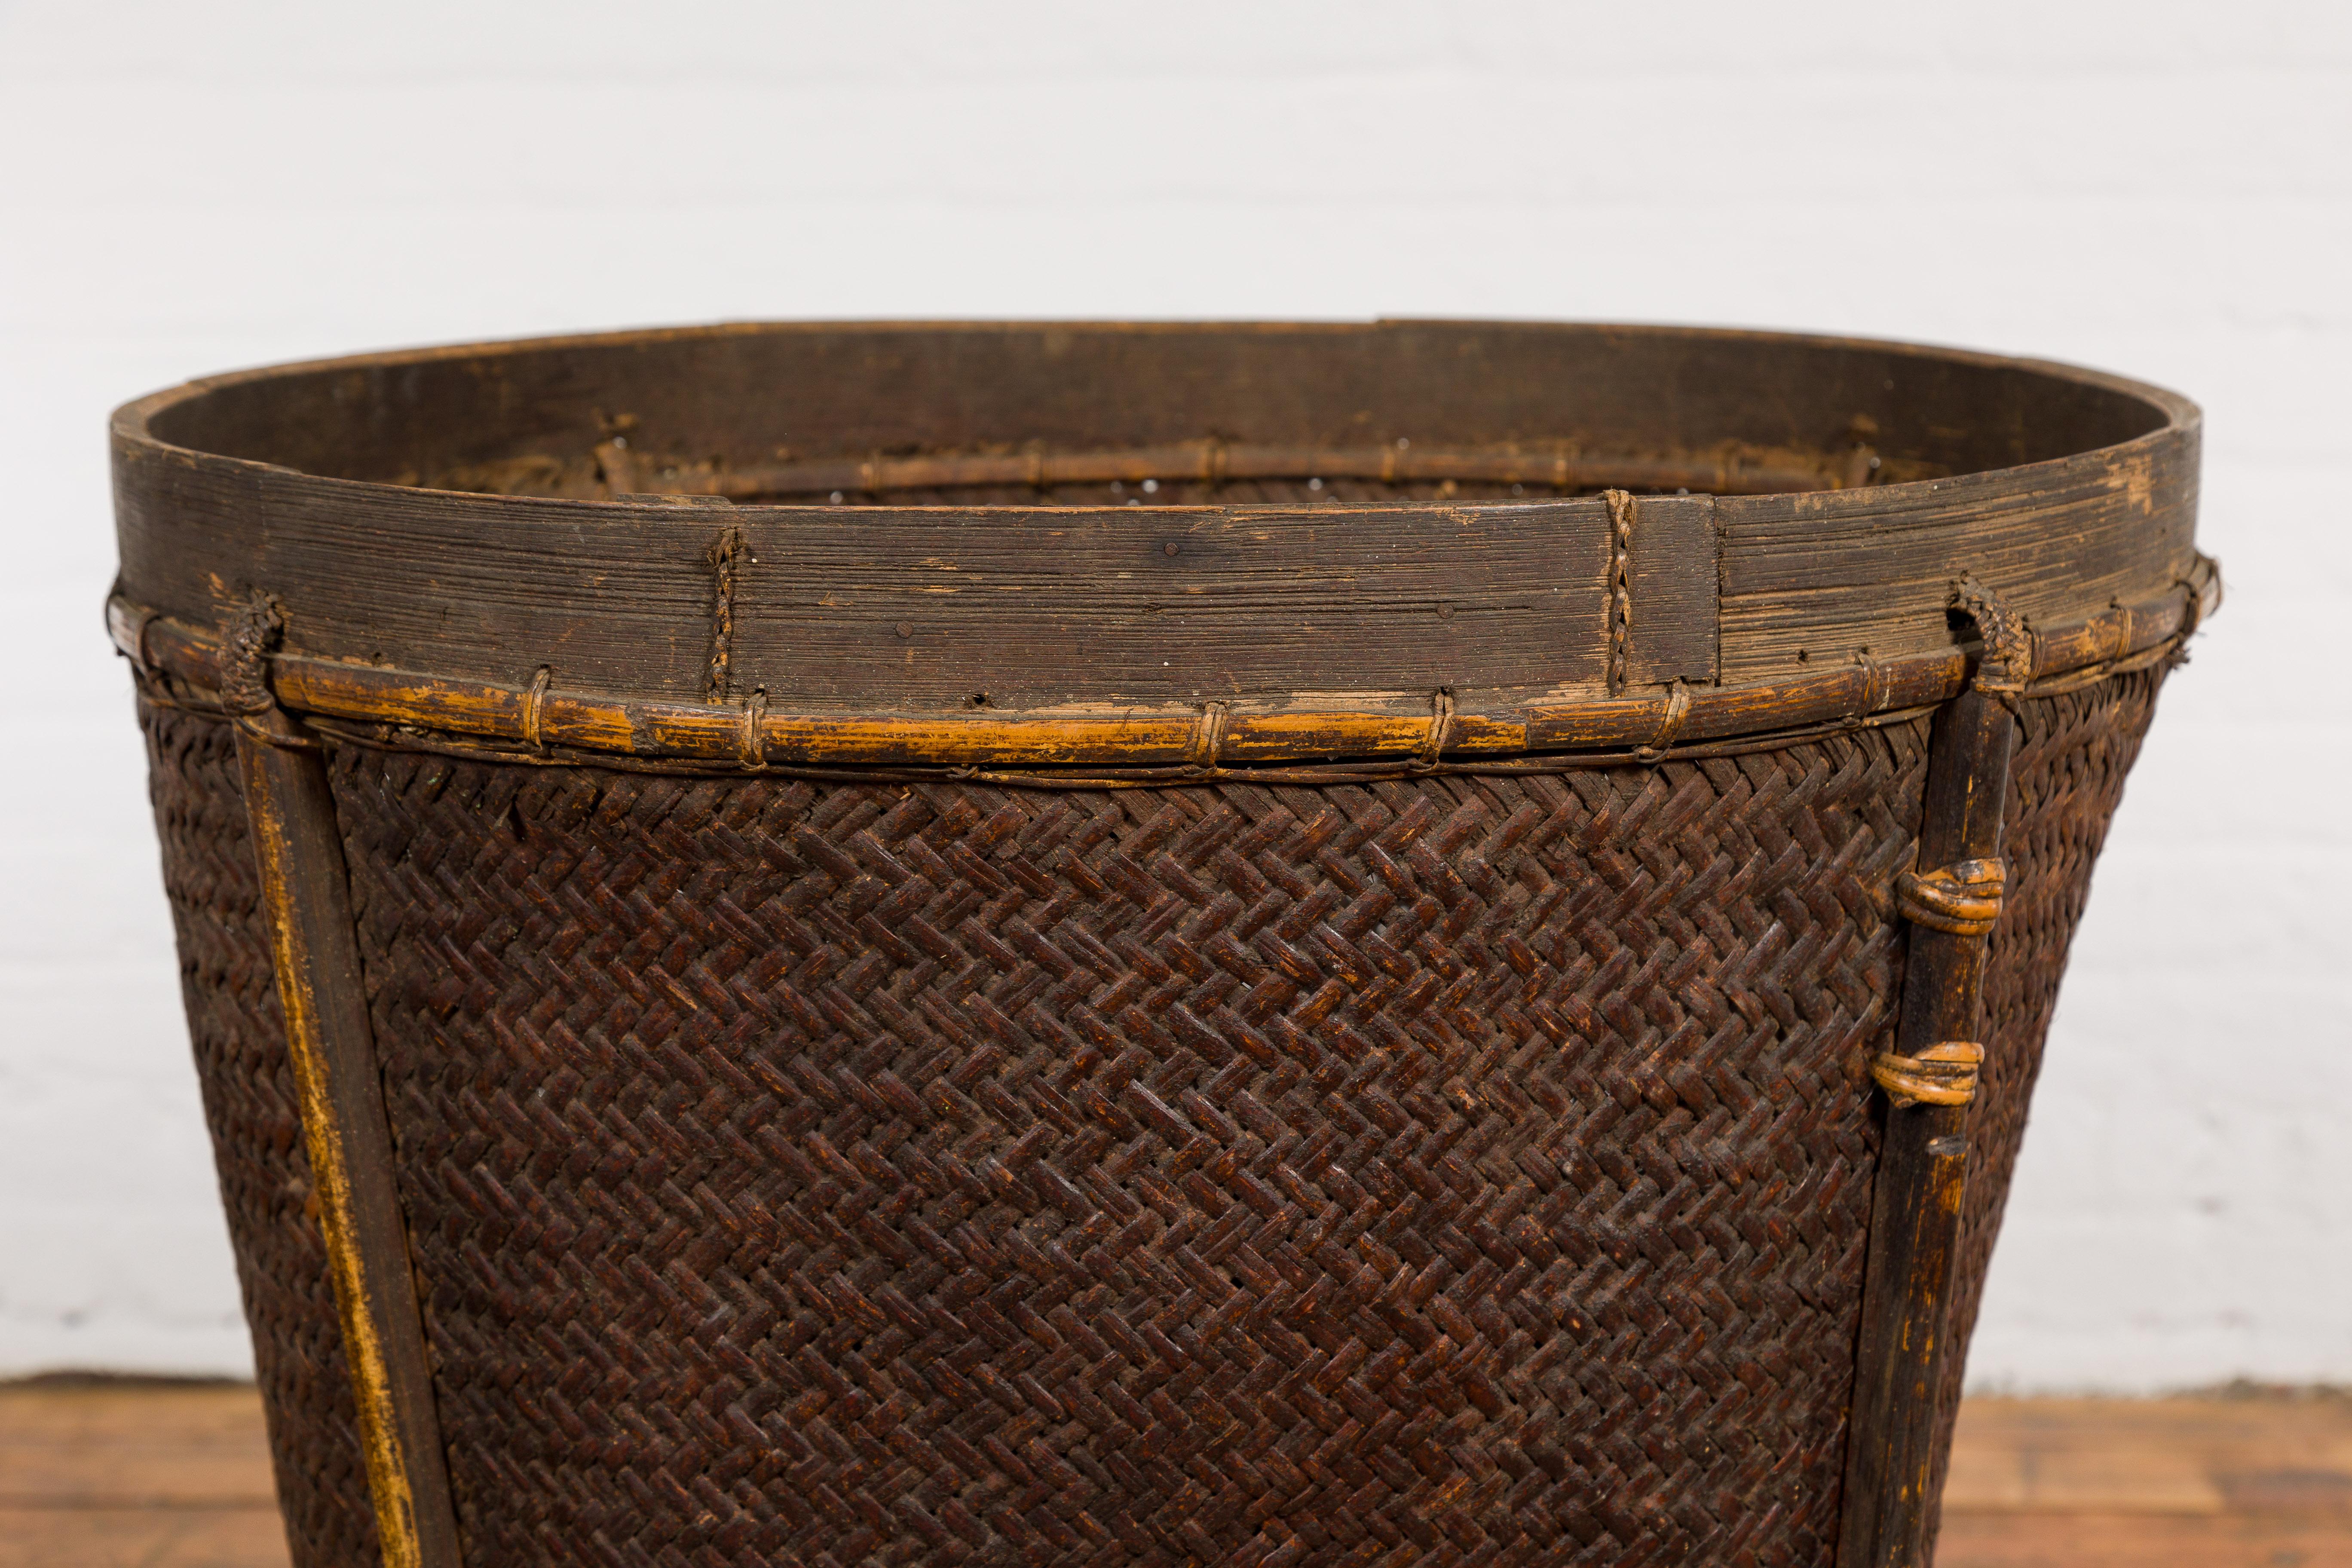 Hand-Woven Rustic Wood and Woven Rattan Farmers Basket with Weathered Patina